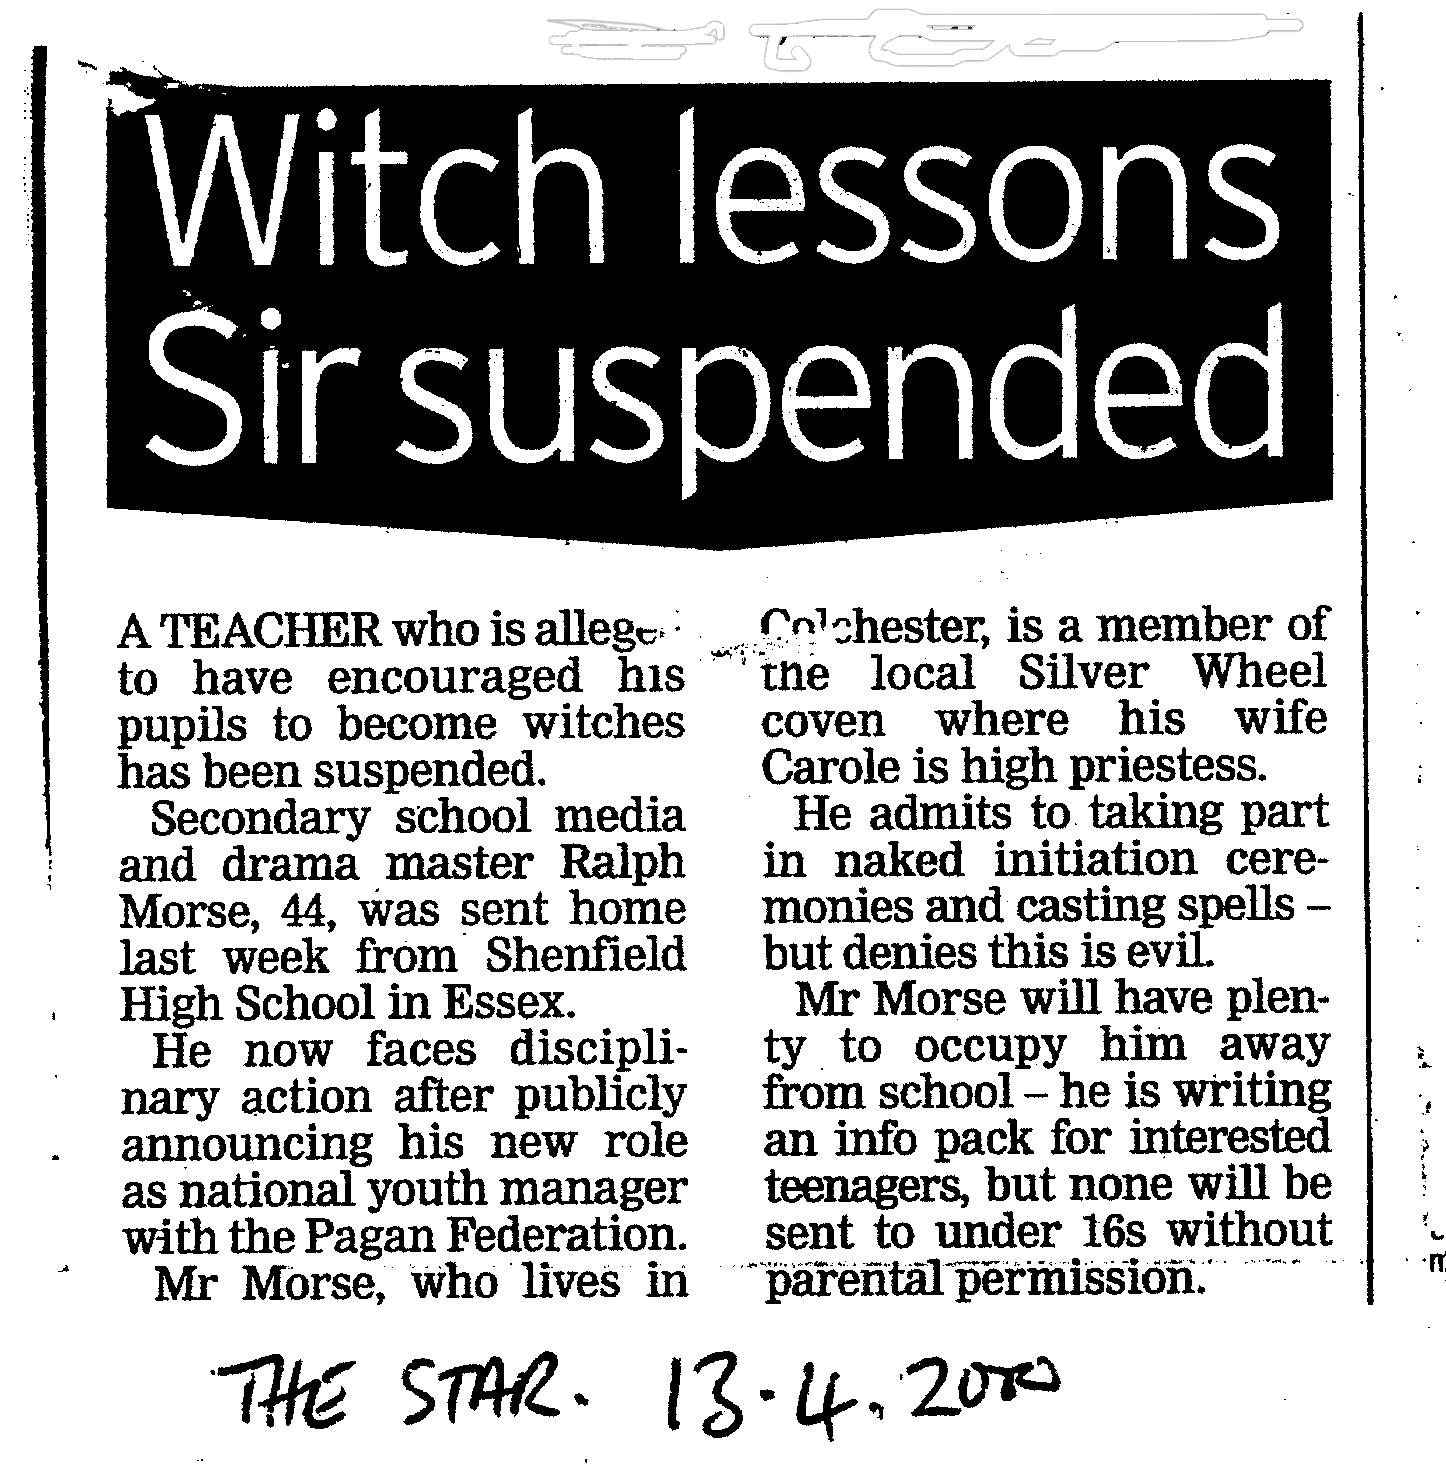 witch lessons suspended